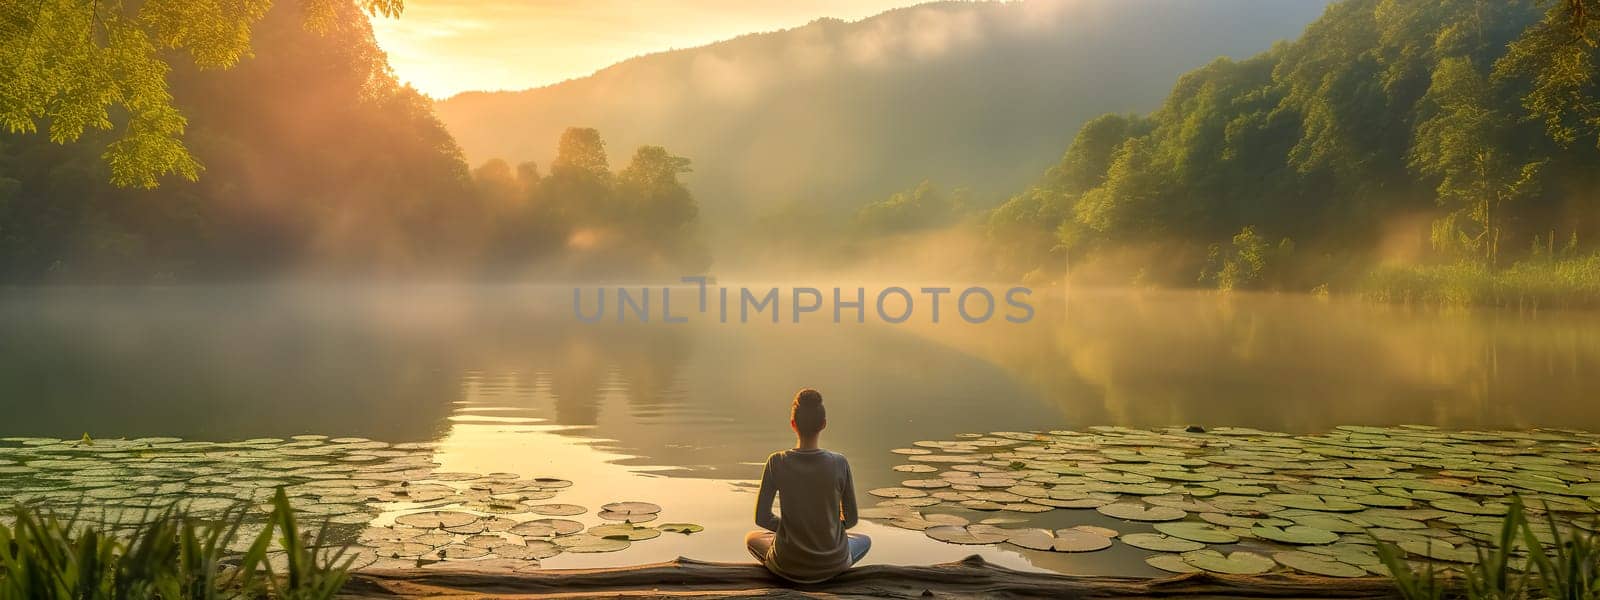 scene of a person meditating by a calm lake surrounded by lush forest, with lily pads floating on the water surface and the soft glow of morning light piercing through the mist by Edophoto